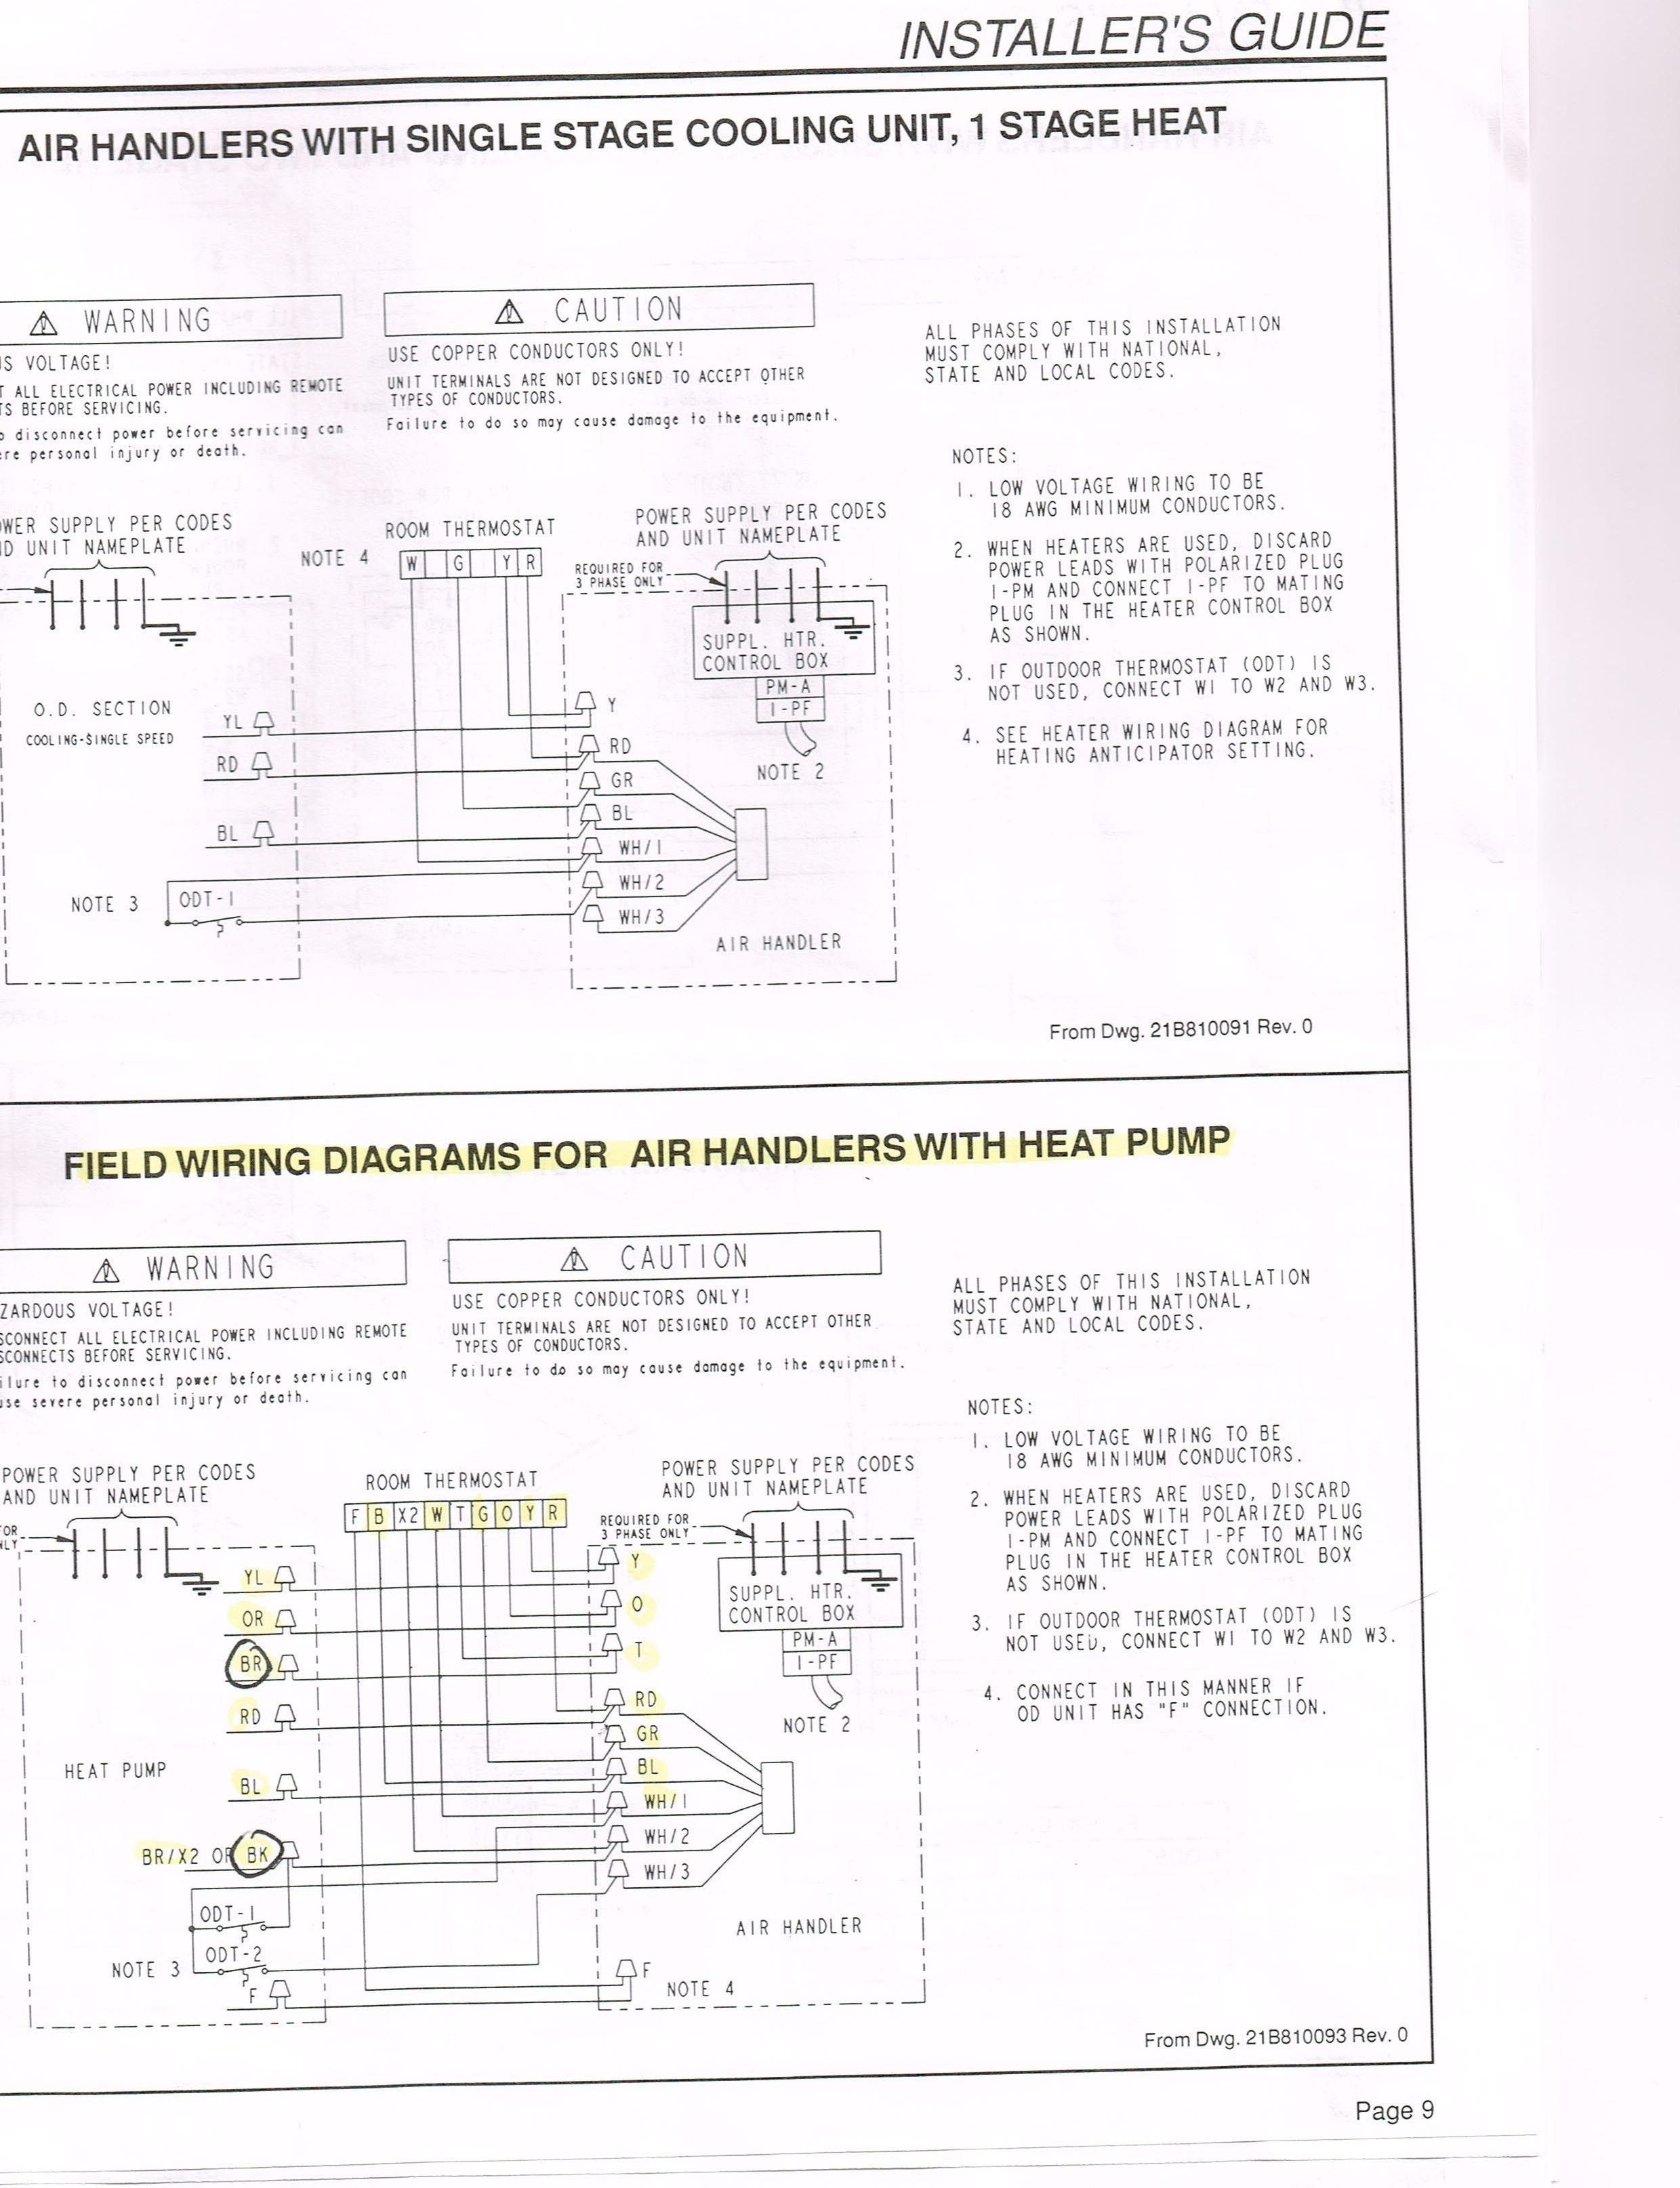 2005 Jeep Grand Cherokee Radio Wiring New Honeywell thermostat T87 Wiring Diagram Diagram Of 2005 Jeep Grand Cherokee Radio Wiring